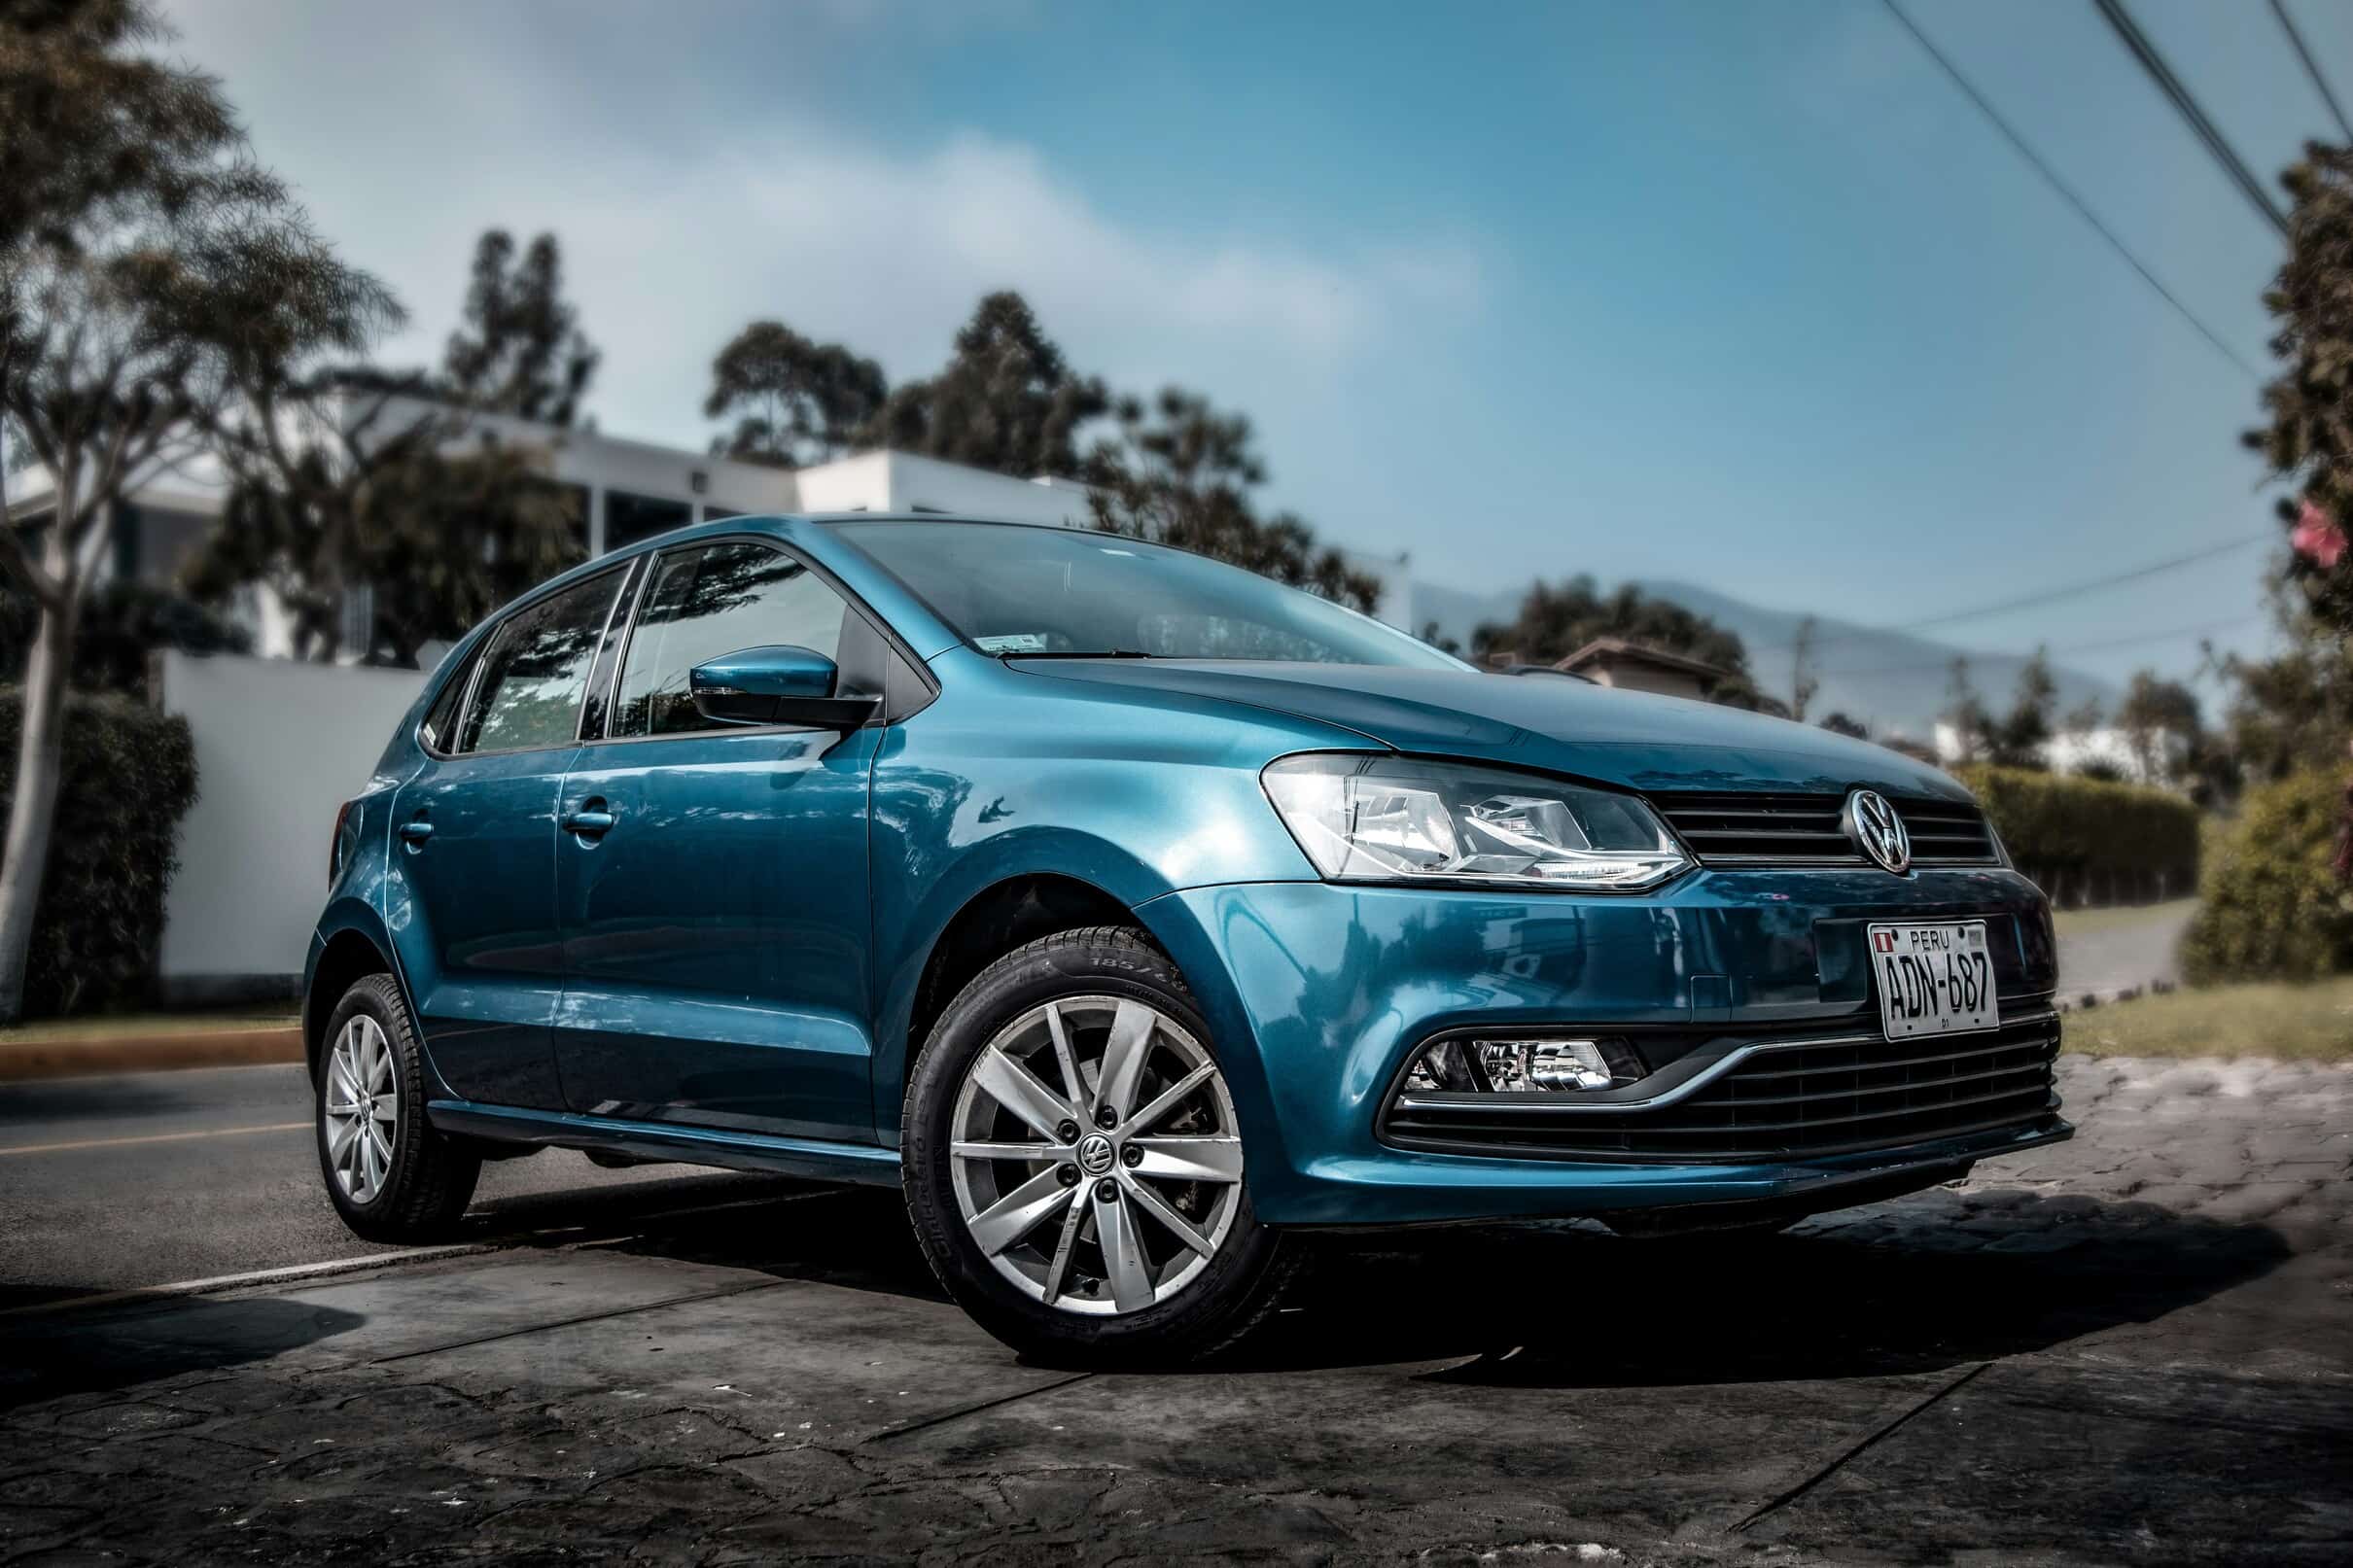 Volkswagen Polo - Compact Car with Stylish Design